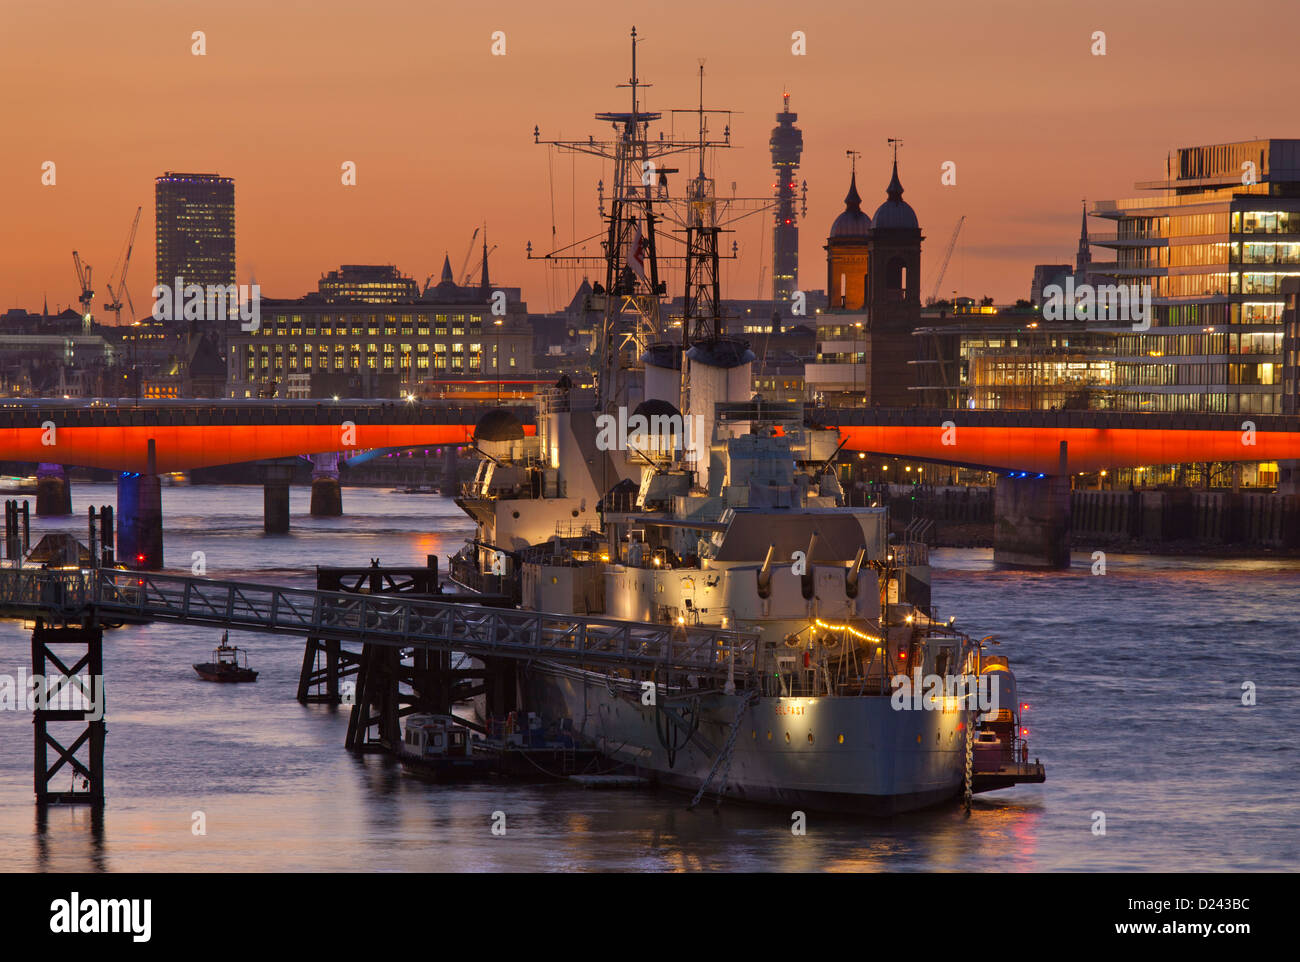 HMS Belfast moored on the Thames with London bridge skyline and post office tower in background at sunset, London, England Stock Photo